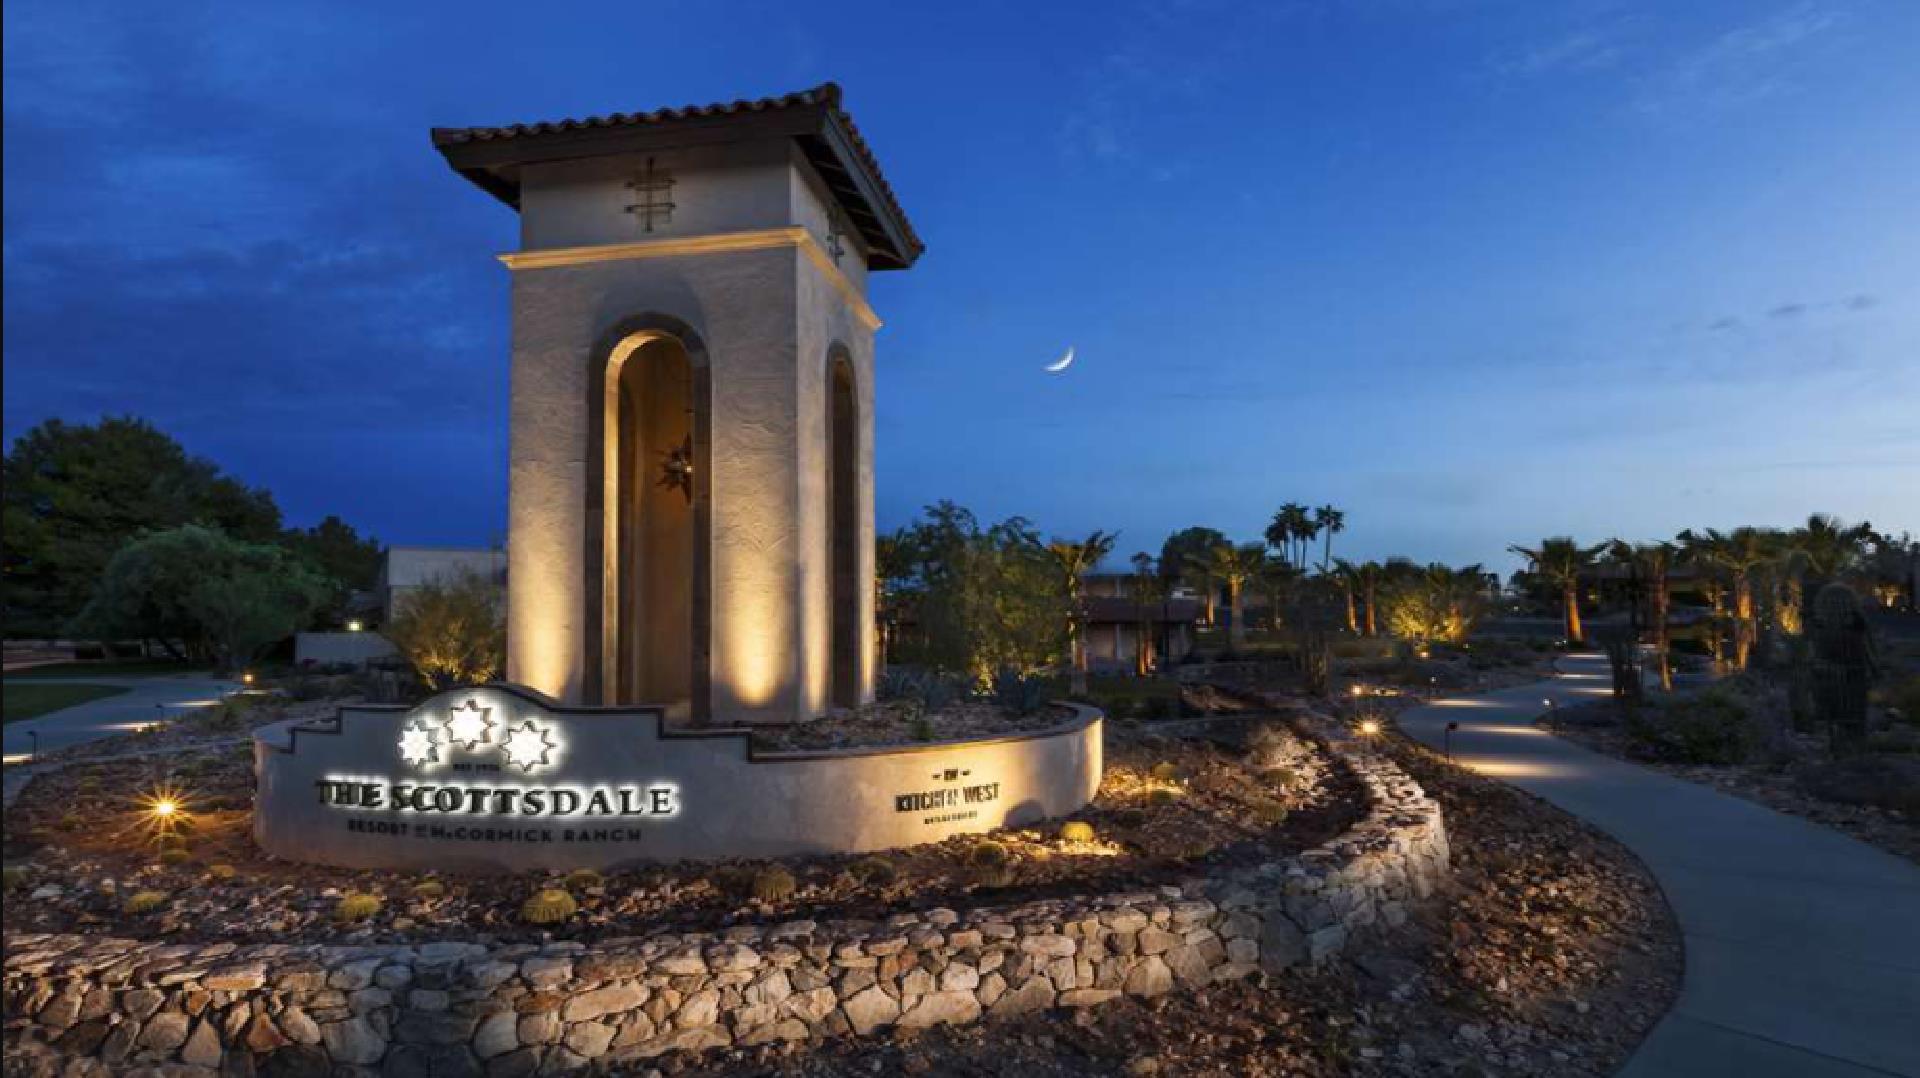 The Scottsdale Resort and Spa, Curio Collection by Hilton in Scottsdale, AZ